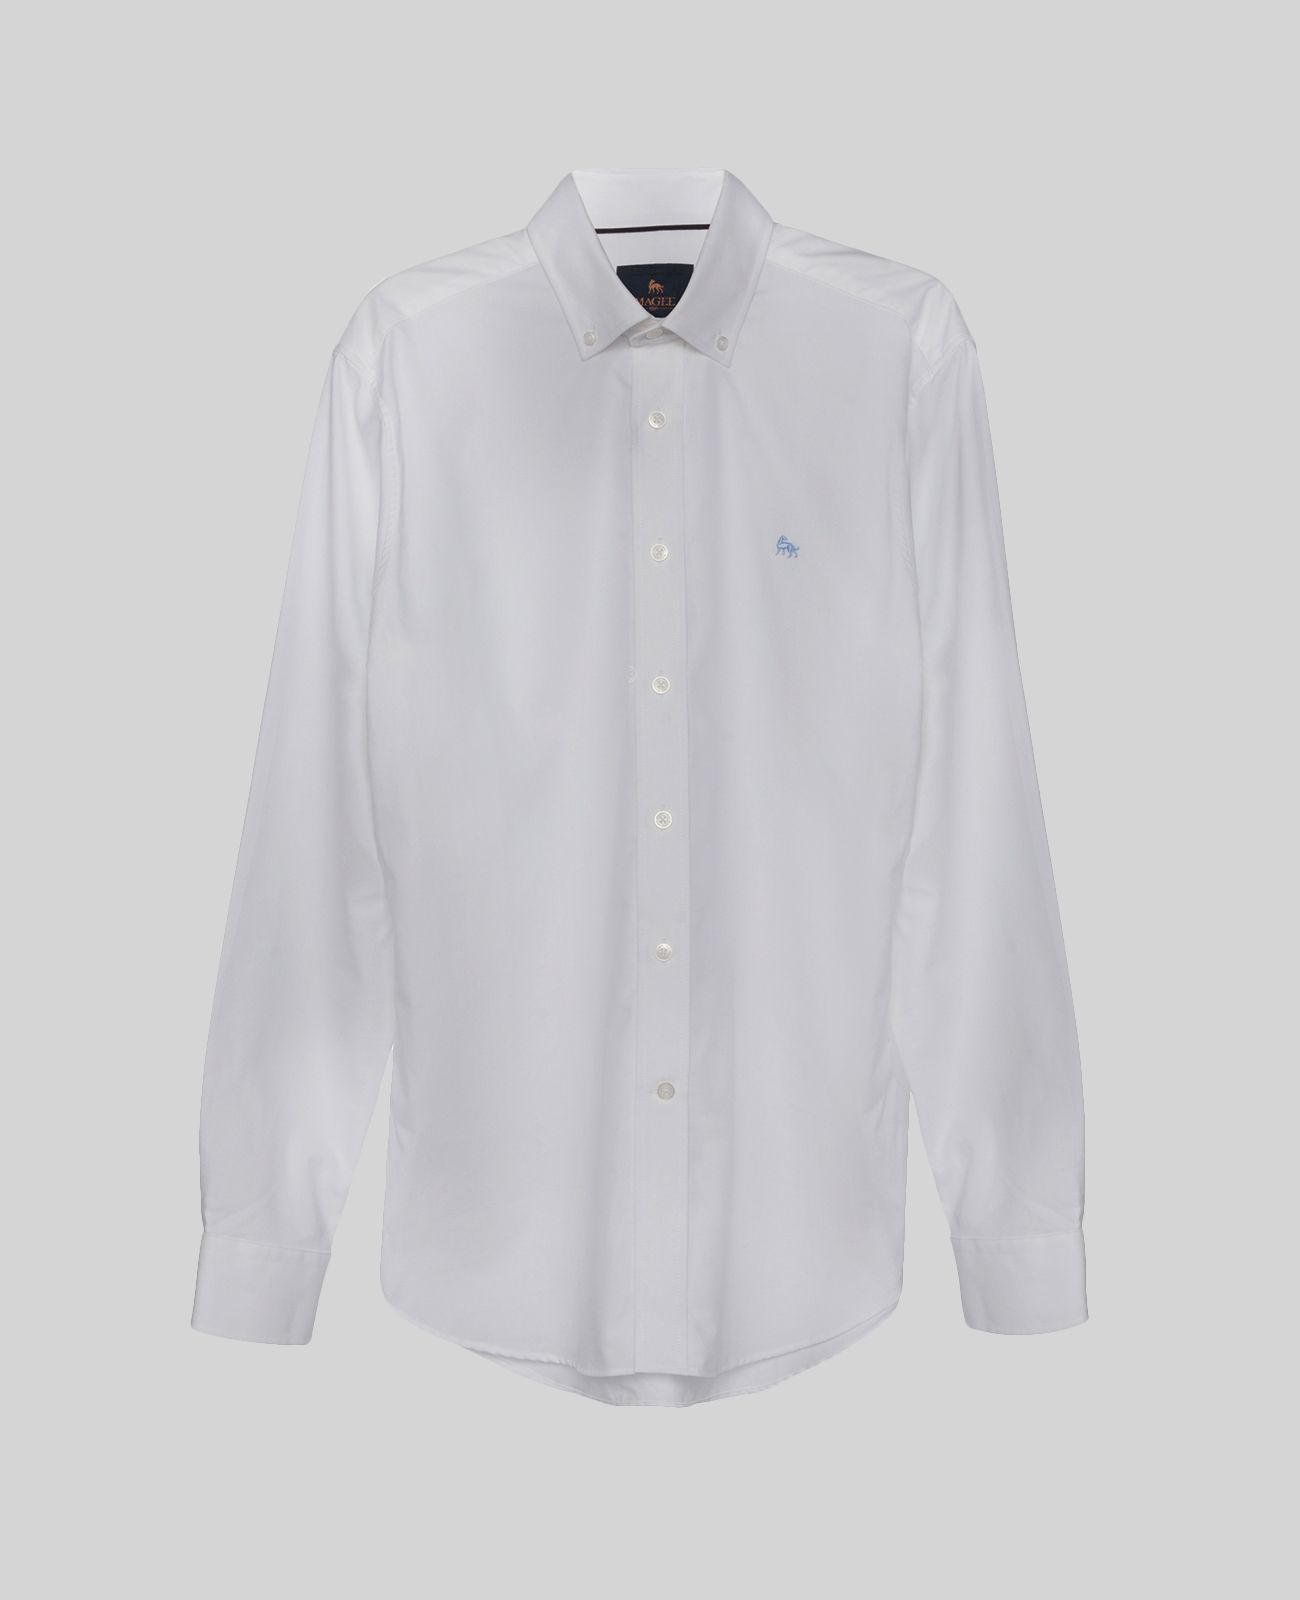 Tullagh Classic Fit Button Down